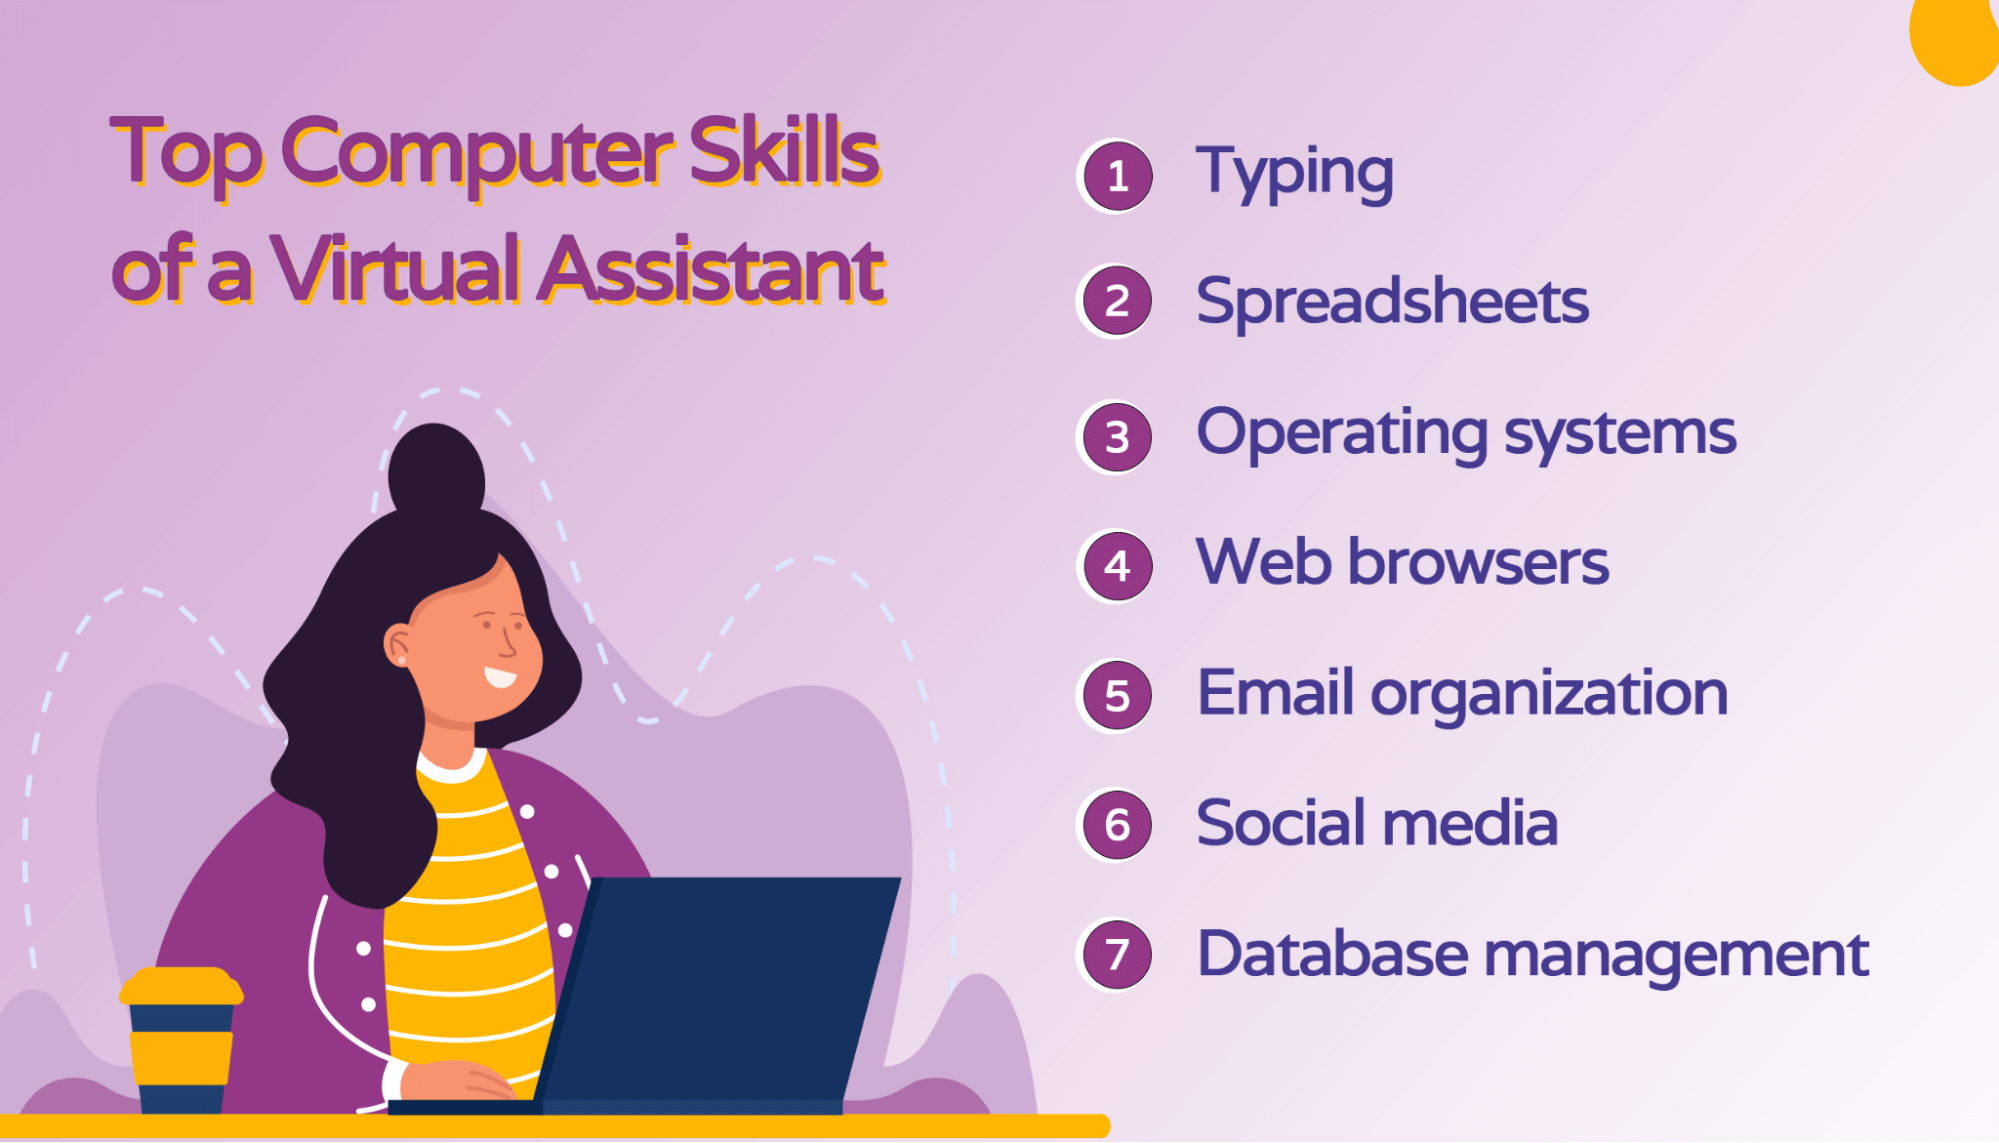 The computer skills that a virtual assistant needs